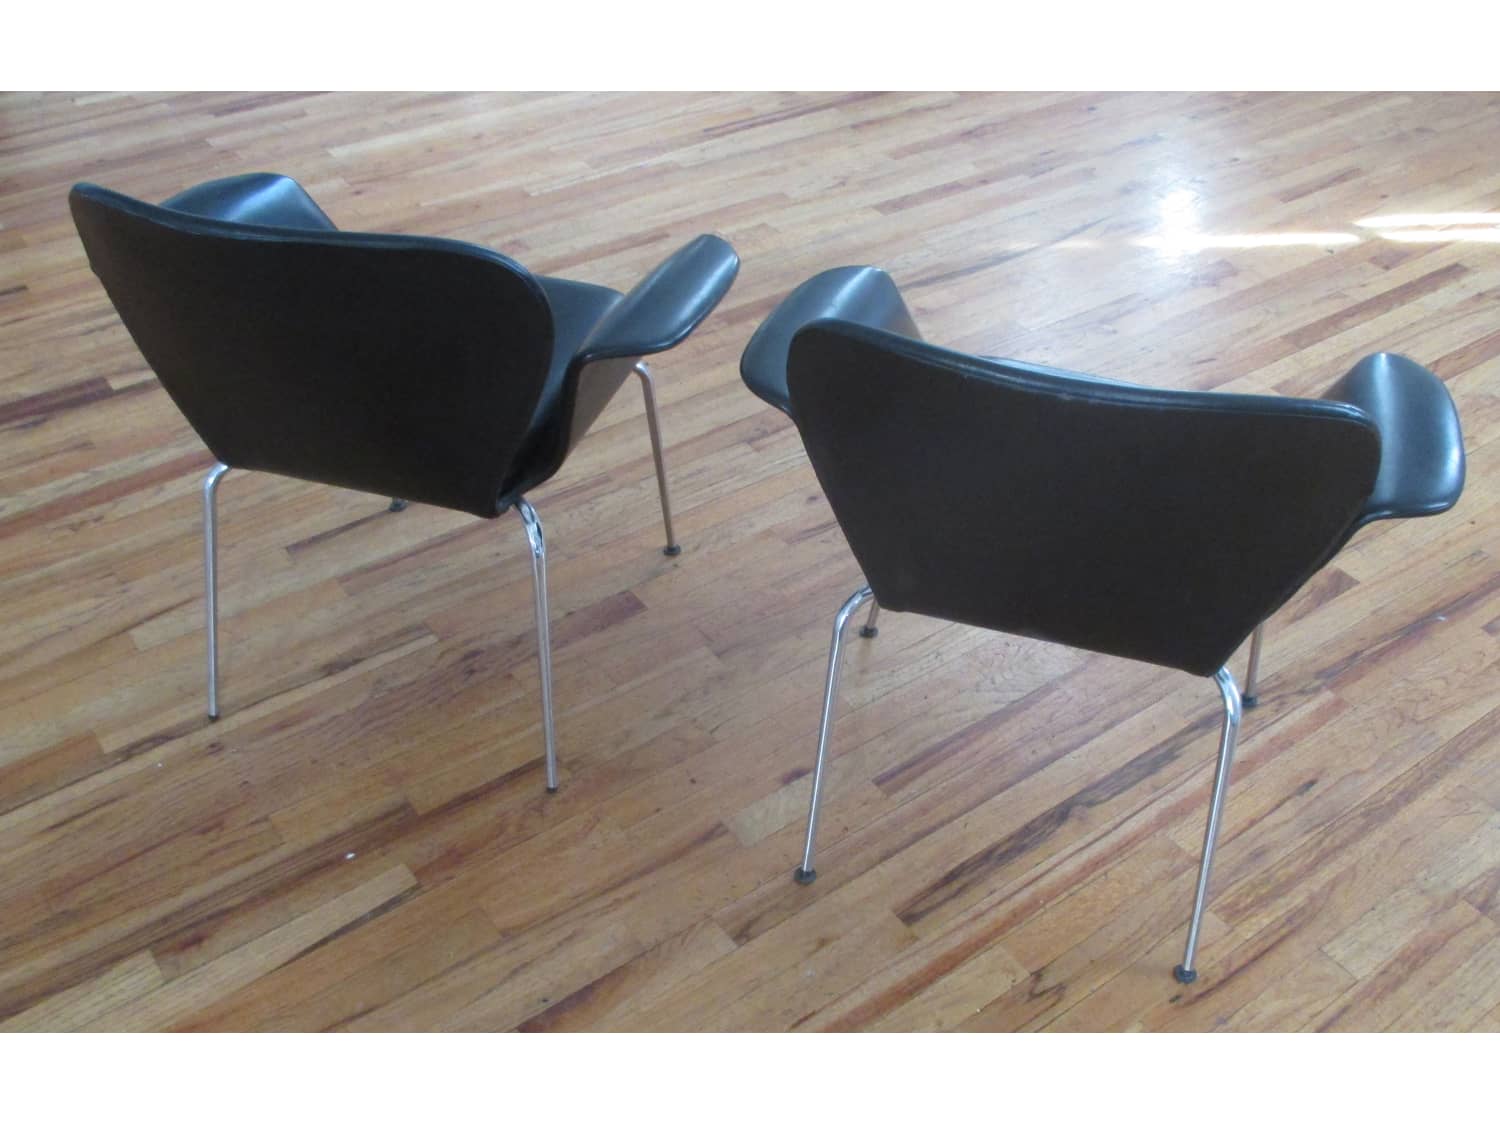 Pair of Black Westnofa Faux Leather Office Chairs - Apartment Therapy's